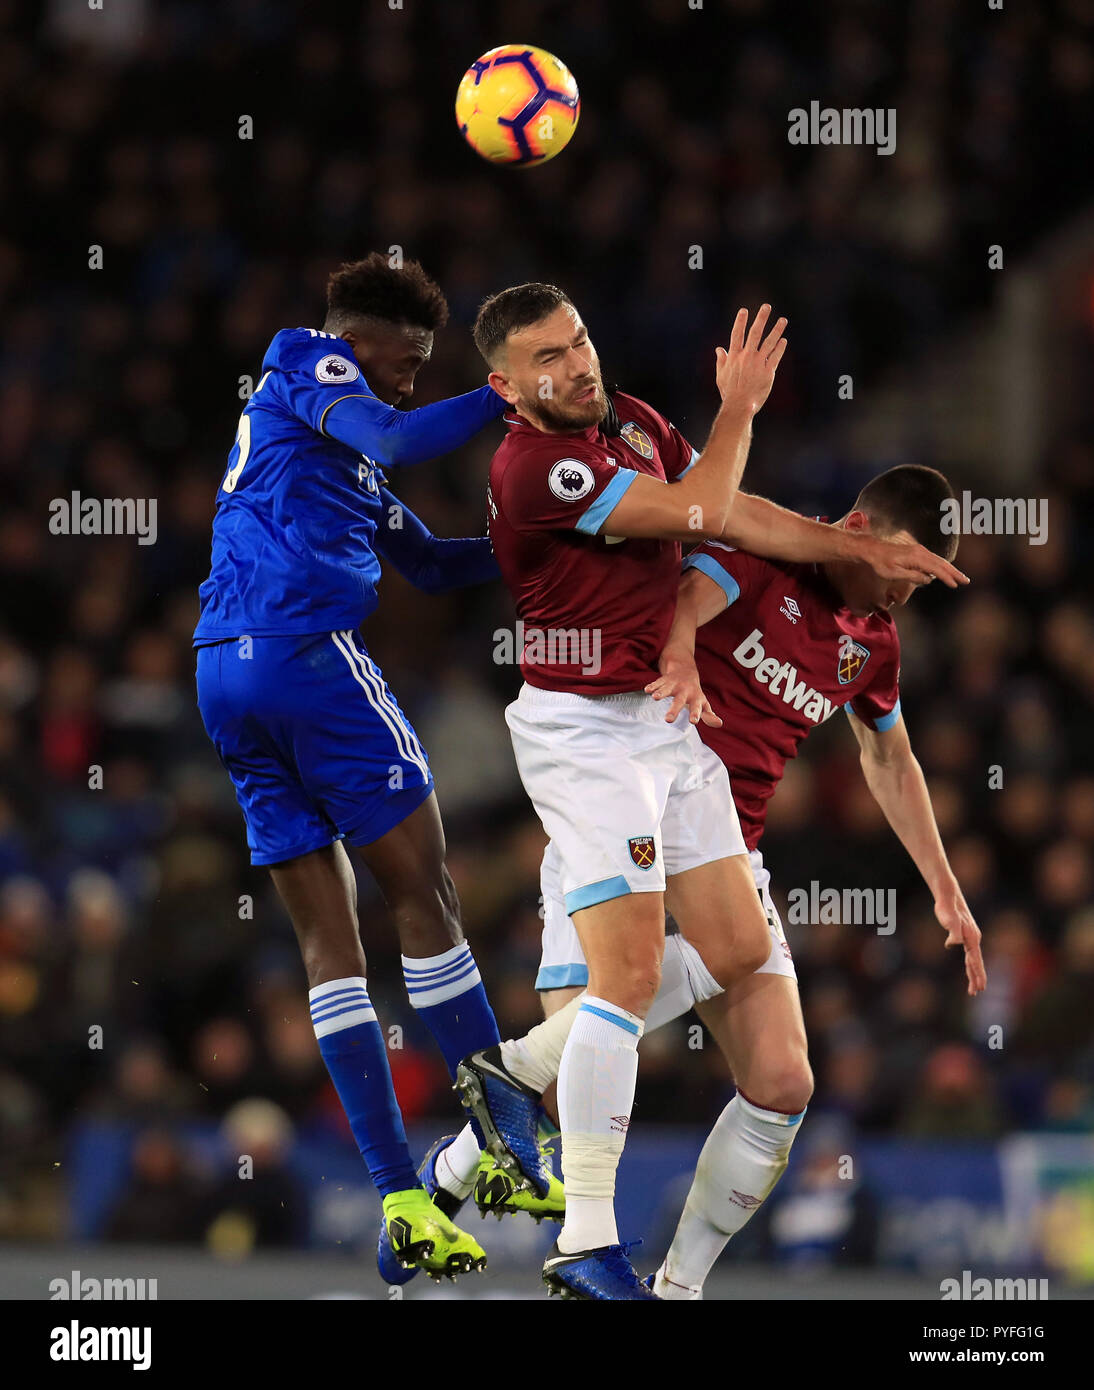 Leicester City's Wilfred Ndidi (left) and West Ham United's Robert Snodgrass battle for the ball in the air during the Premier League match at The King Power Stadium, Leicester. Stock Photo